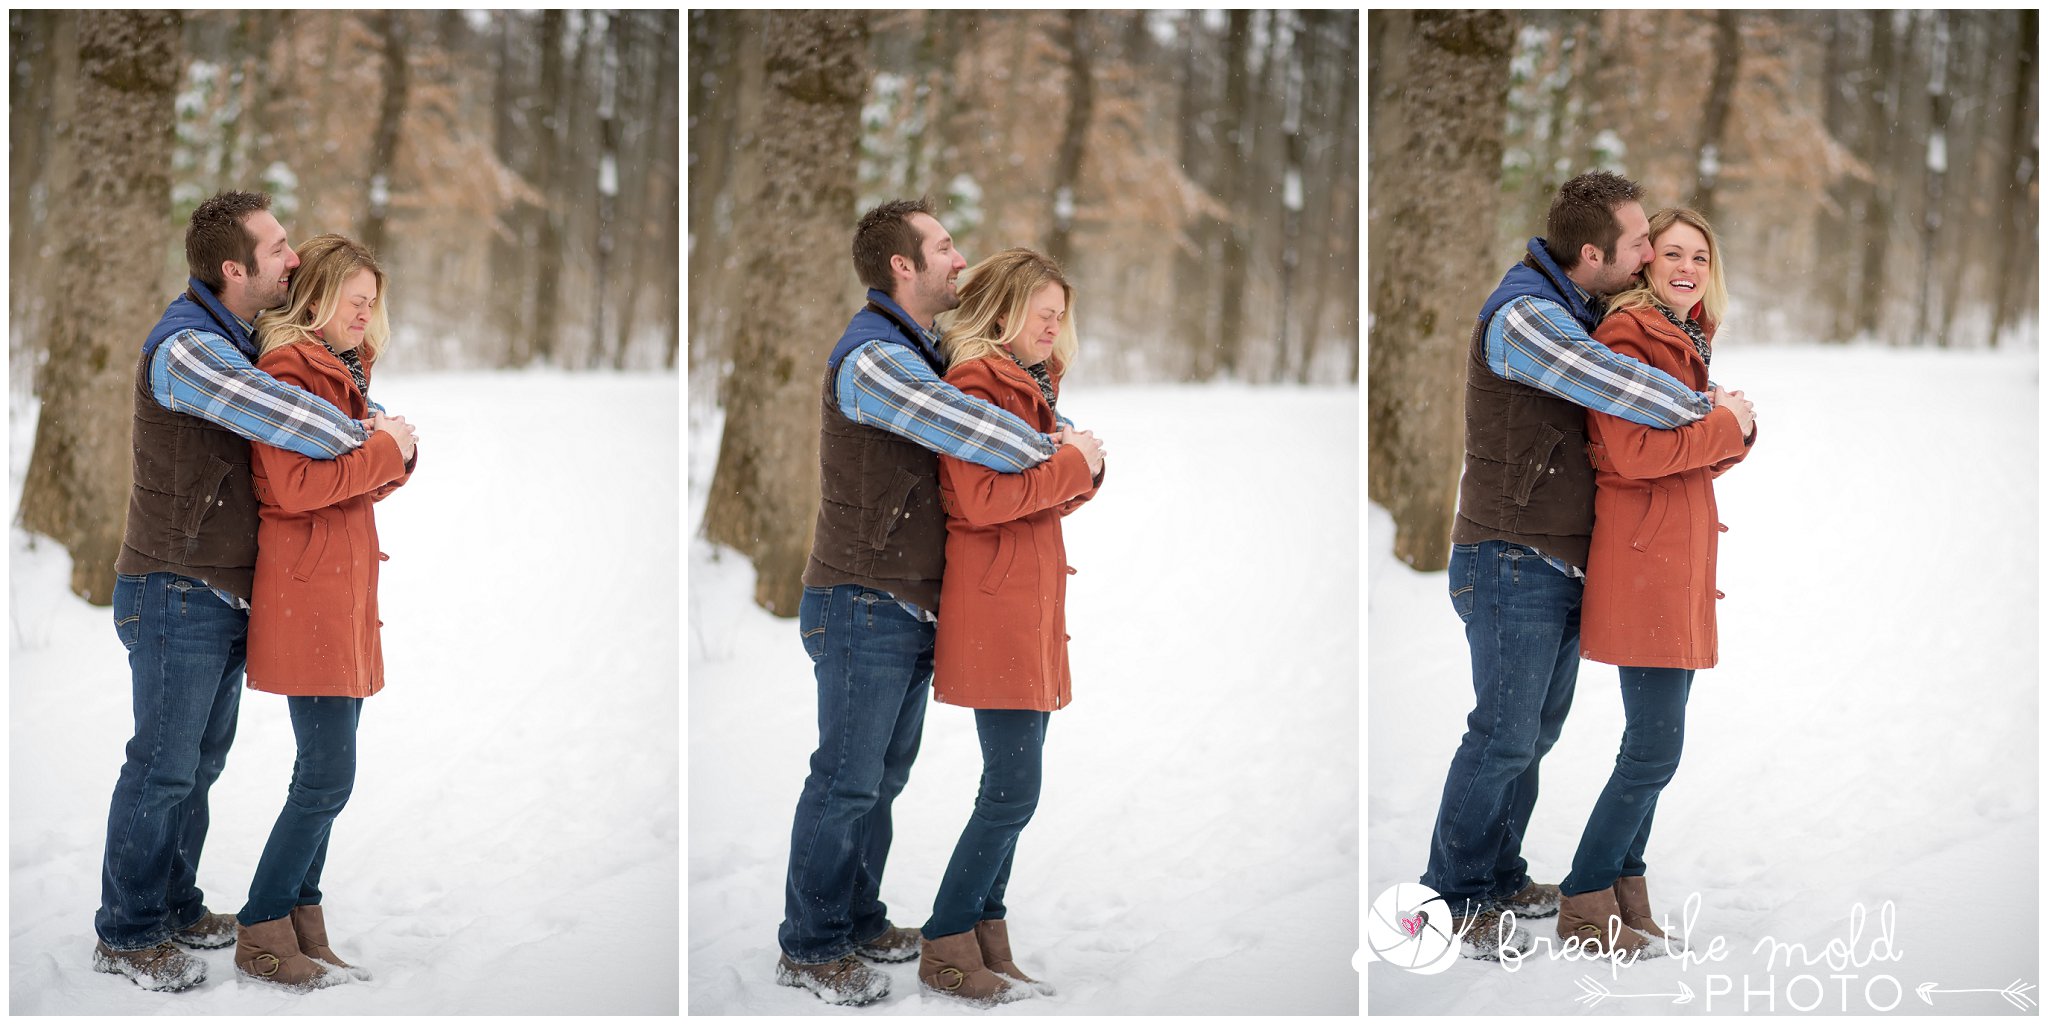 break-the-mold-photo-snowy-day-engagement-photos-knoxville-tn-tennessee-snow-day-pictures-winter-outdoor-unique-family_1497.jpg